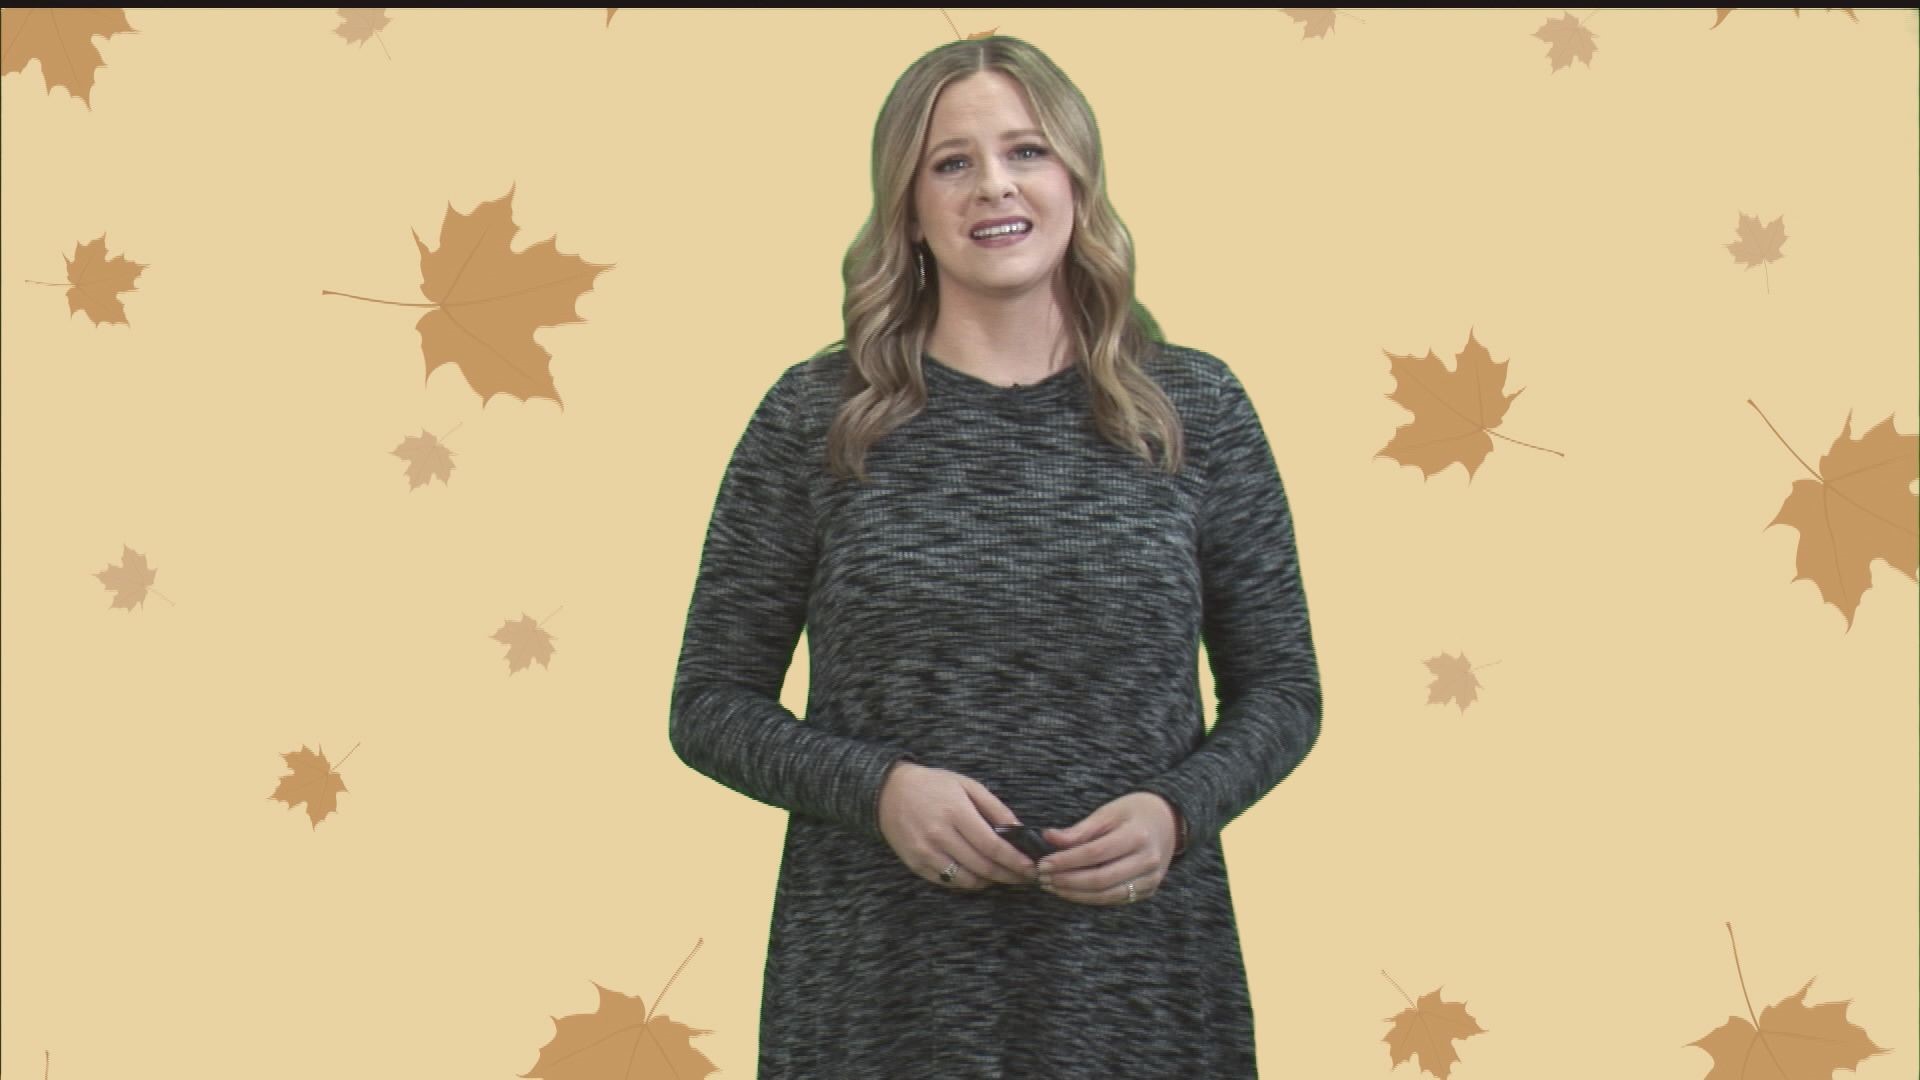 Stacey Spivey gives her ‘2 cents’ on the importance of taking a moment to give thanks for what brings you joy this Thanksgiving.